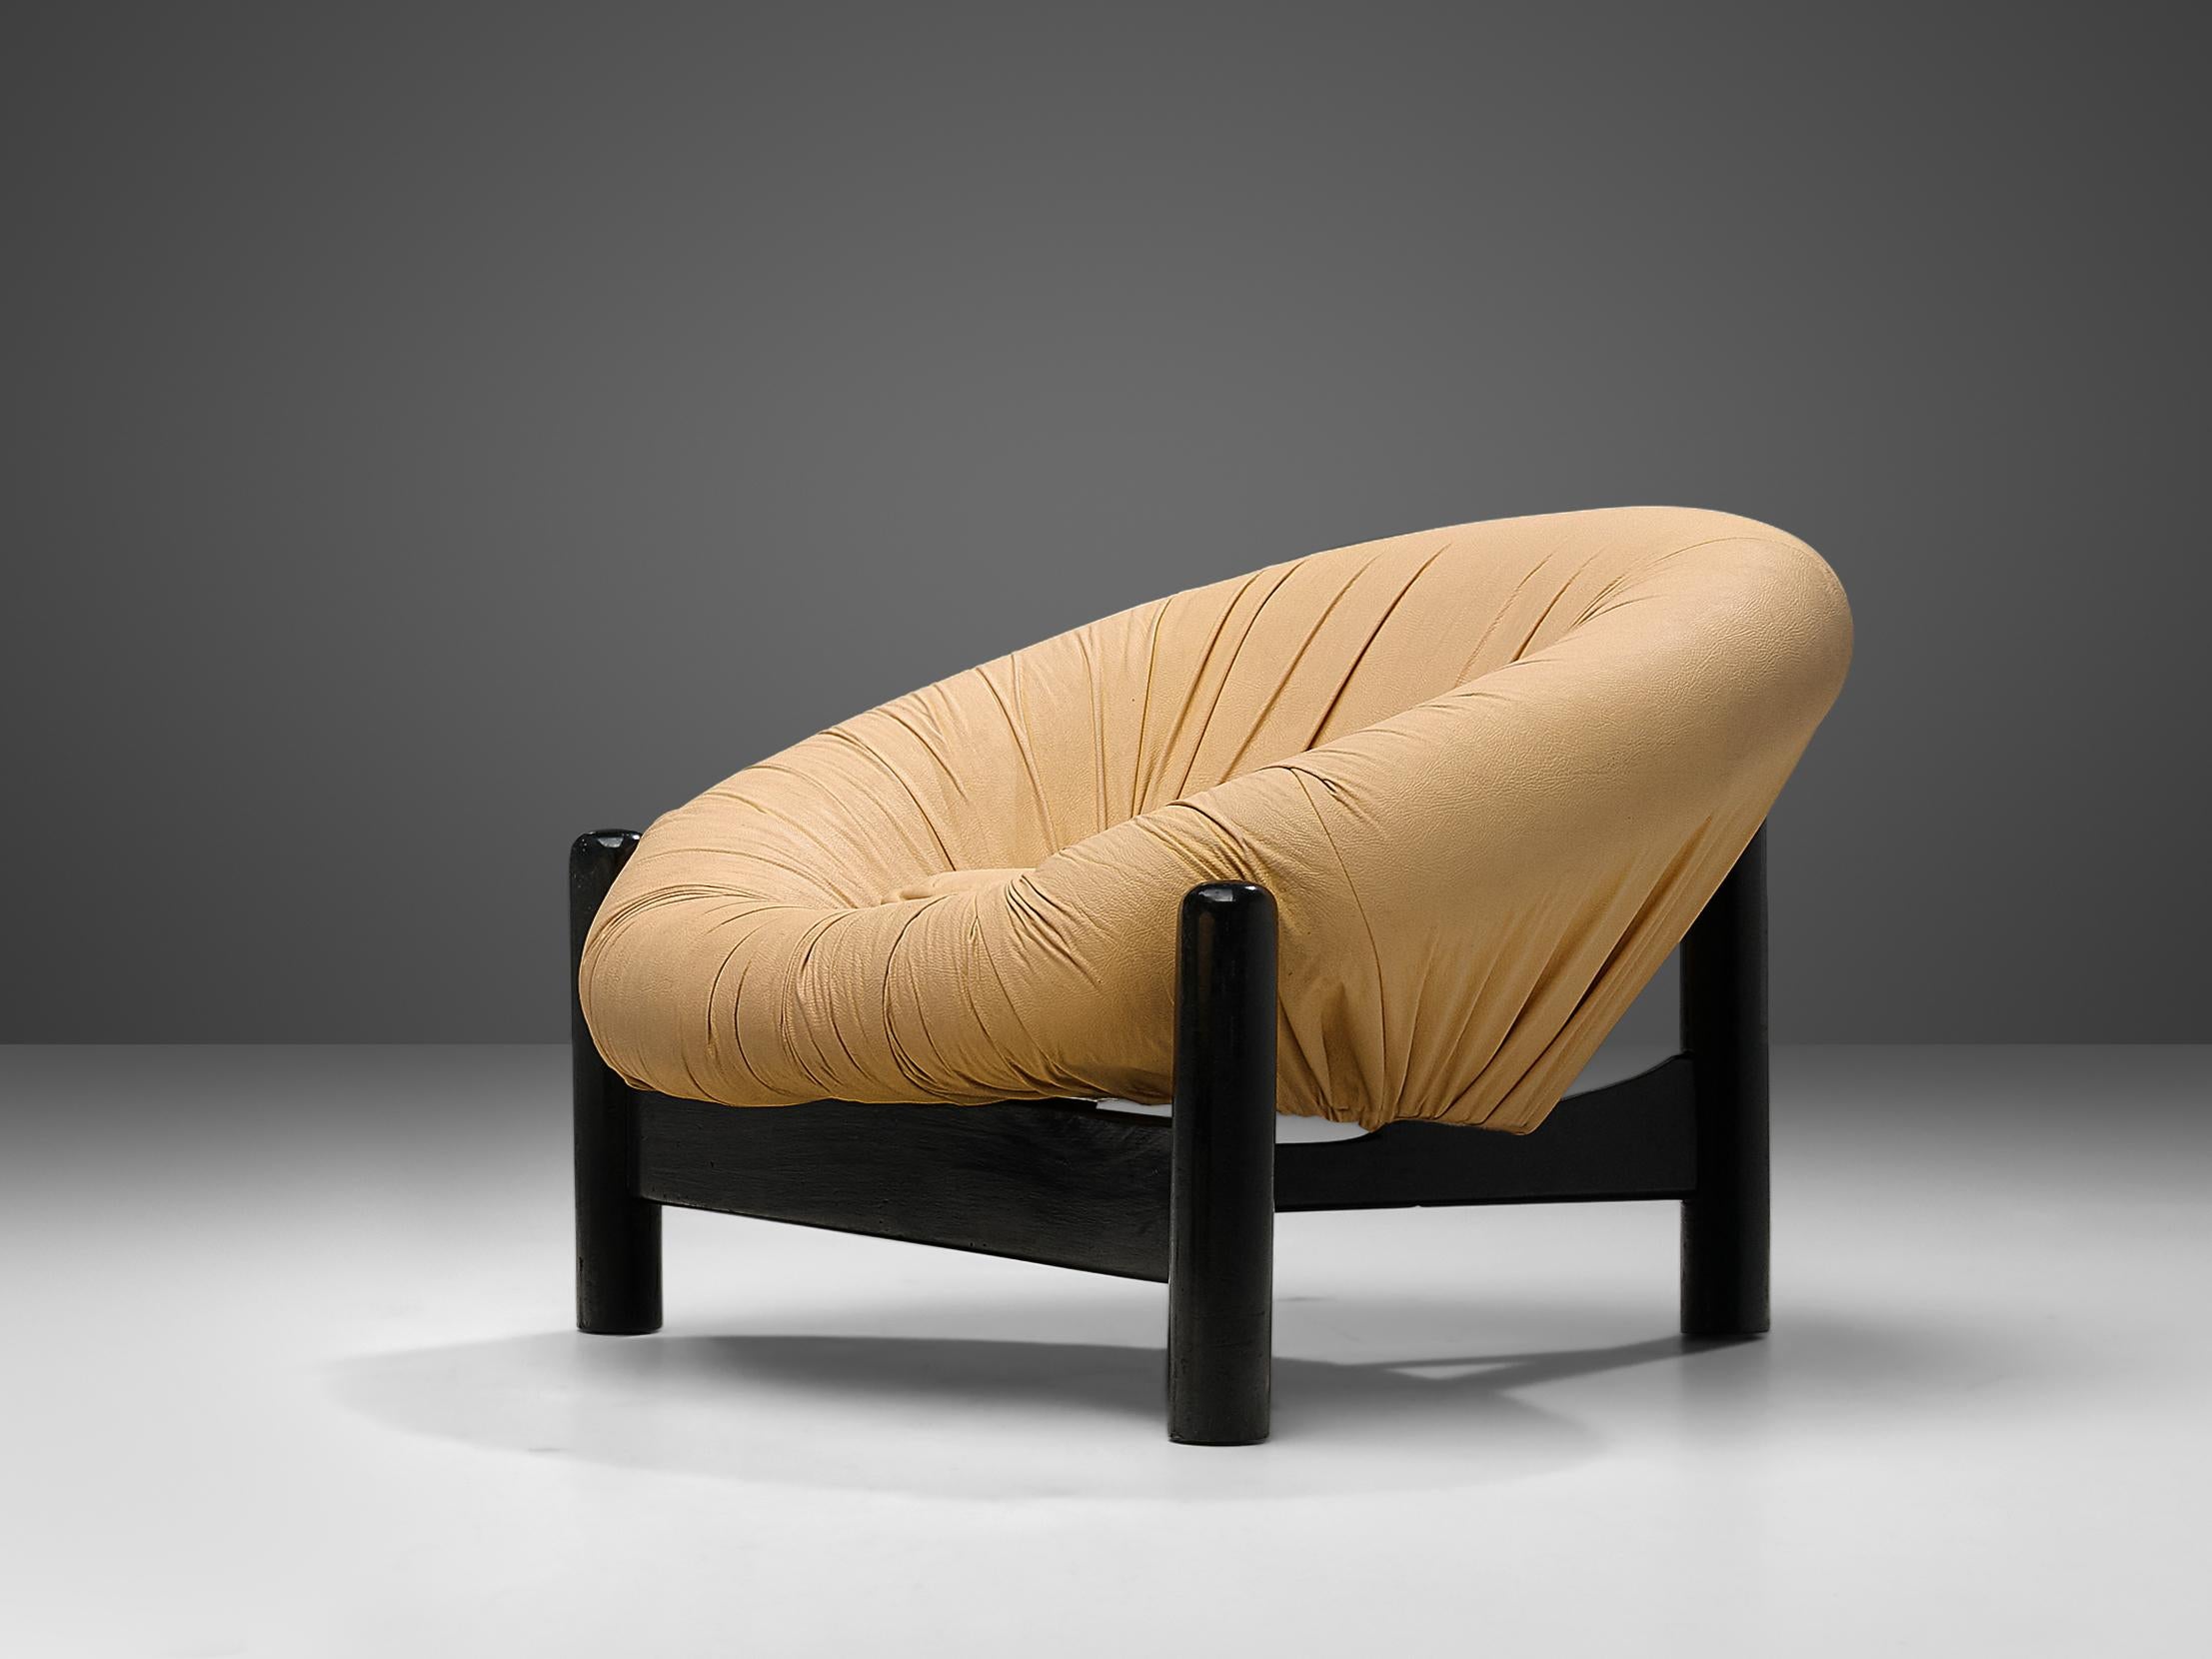 Round lounge chair, lacquered wood, yellow leatherette, Brazil, 1970s

This bulky Brazilian lounge chair consists of a round shell that forms a ring around the seat. The yellow leatherette is tufted around the shell in dynamic folds. The shape